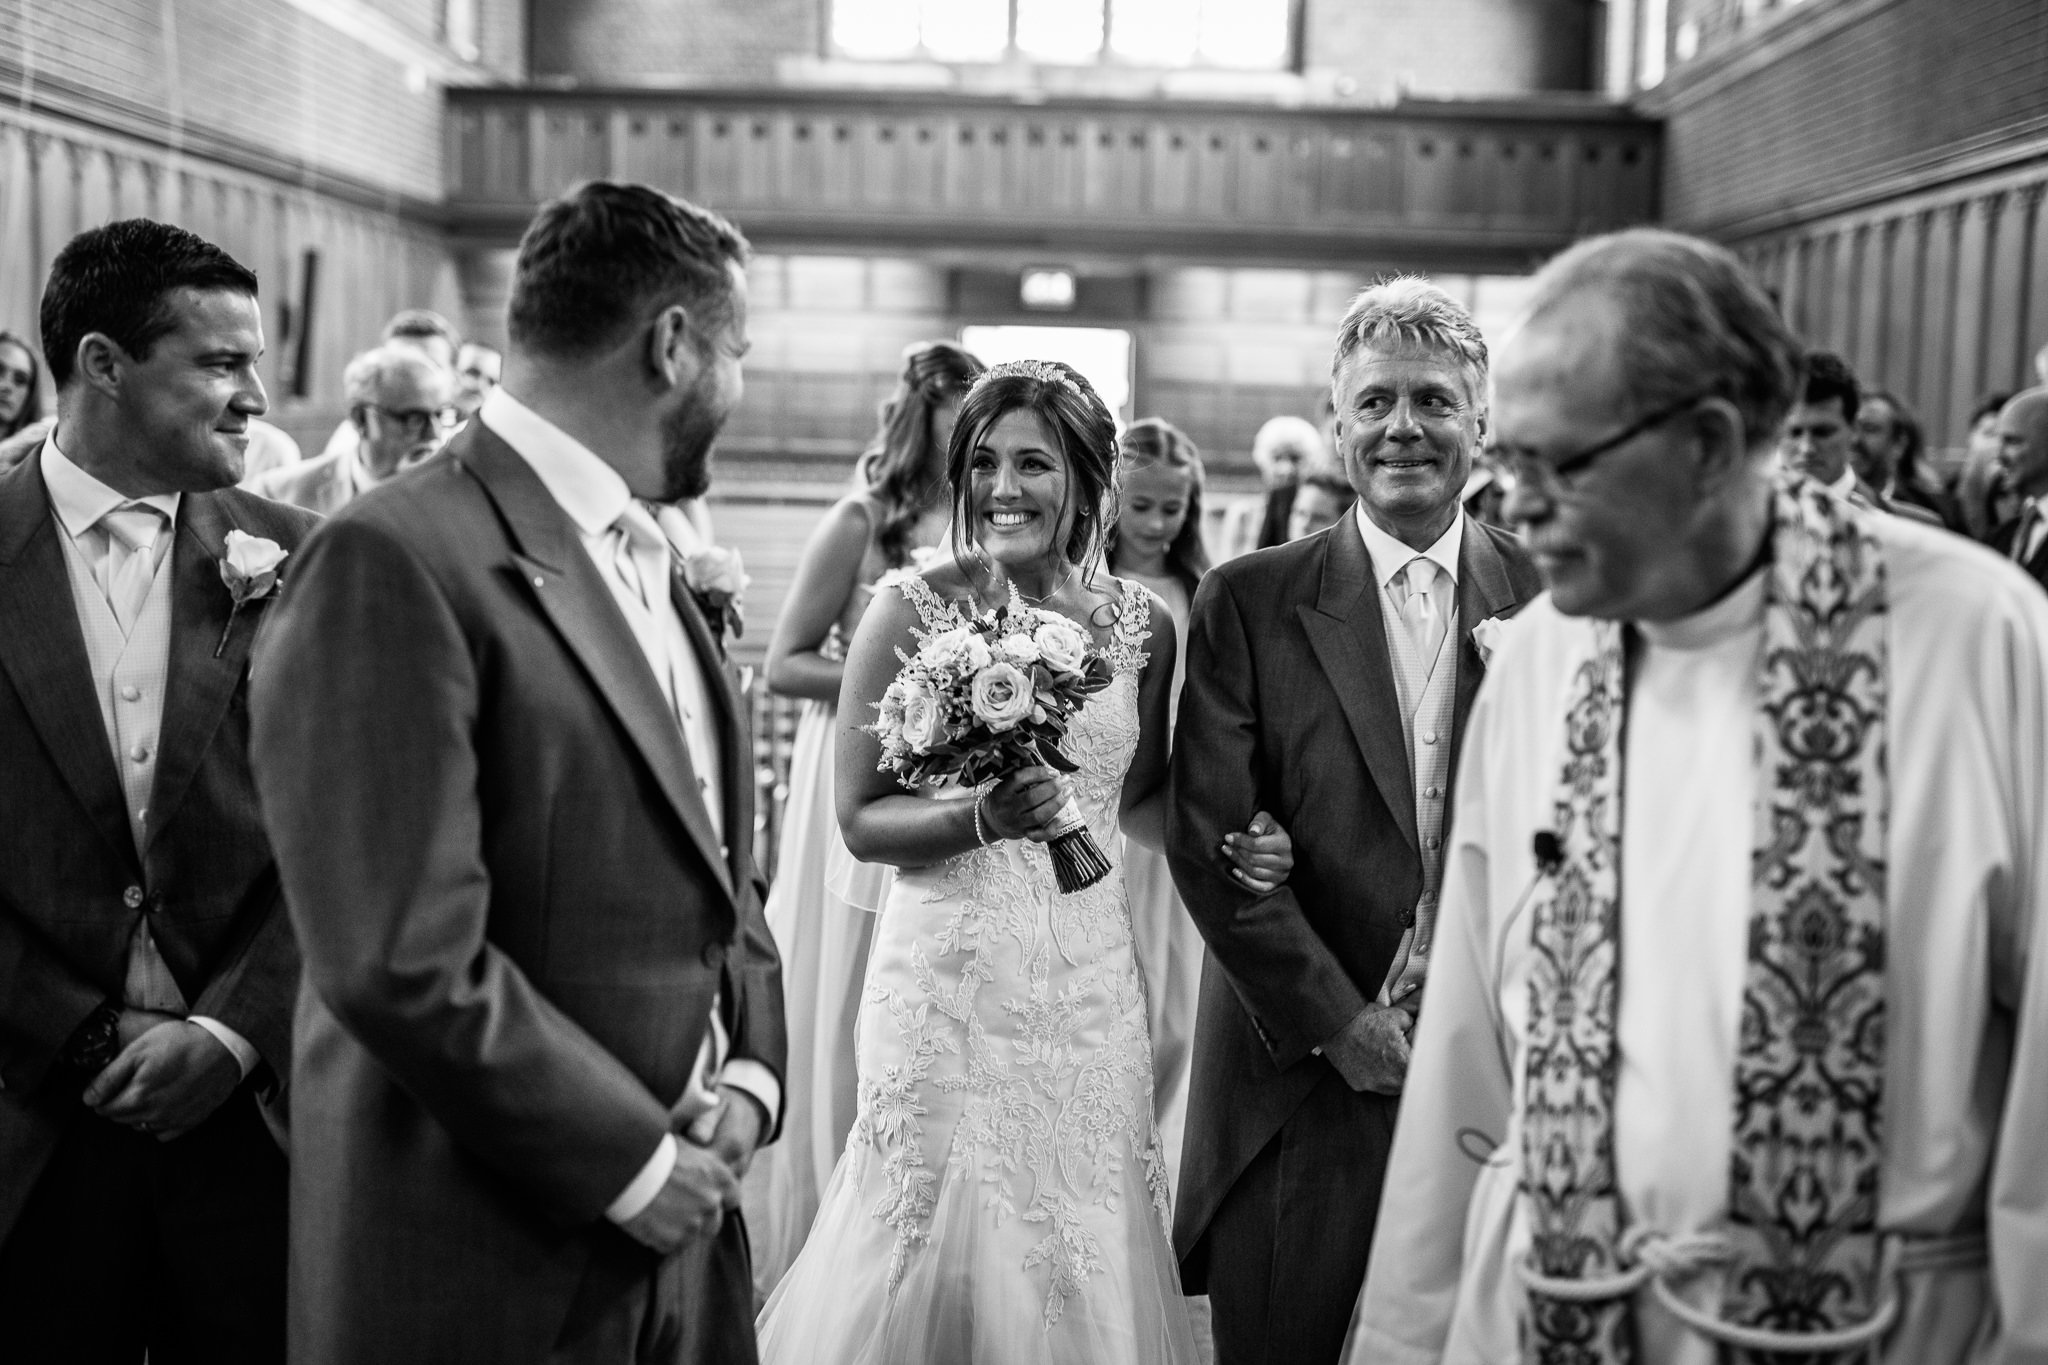  Bride smiles at the Groom as they meet at the top of the aisle  at the Chapel of St Luke at Epsom College 